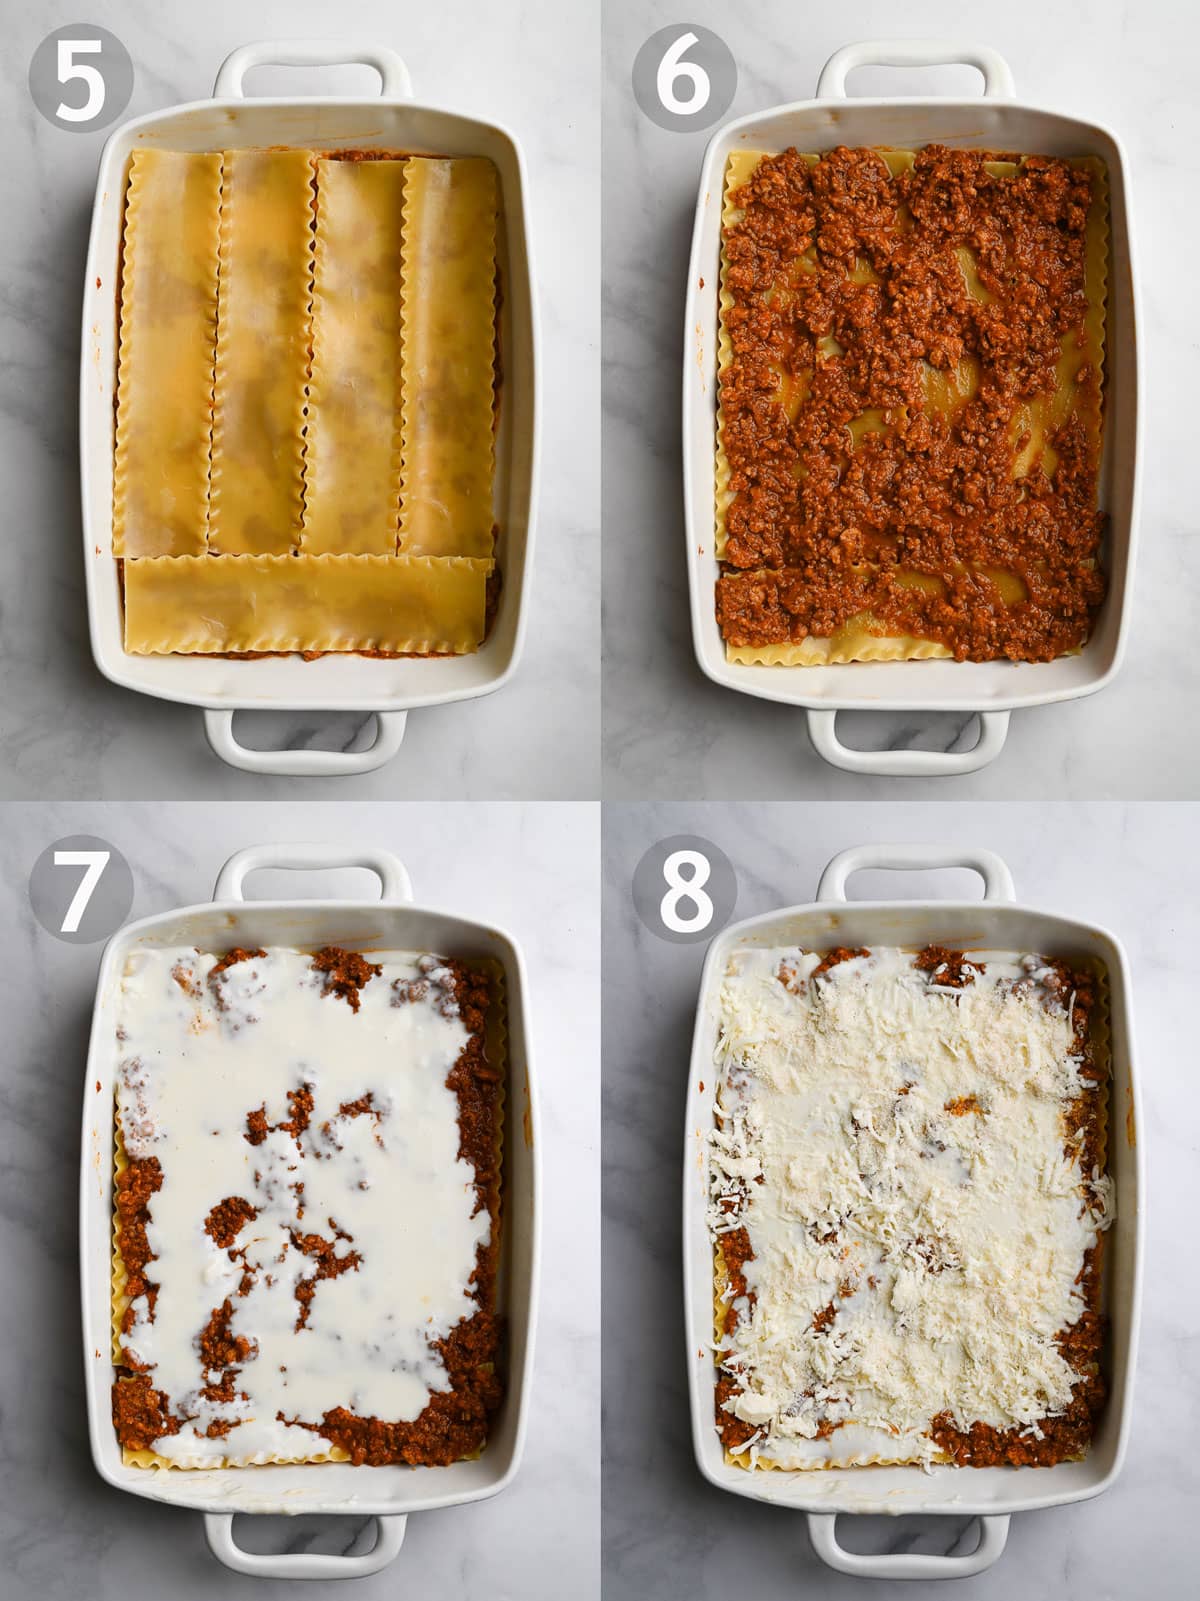 Lasagna steps, 5-8, showing how to layer lasagna with meat sauce, bechamel and cheese.